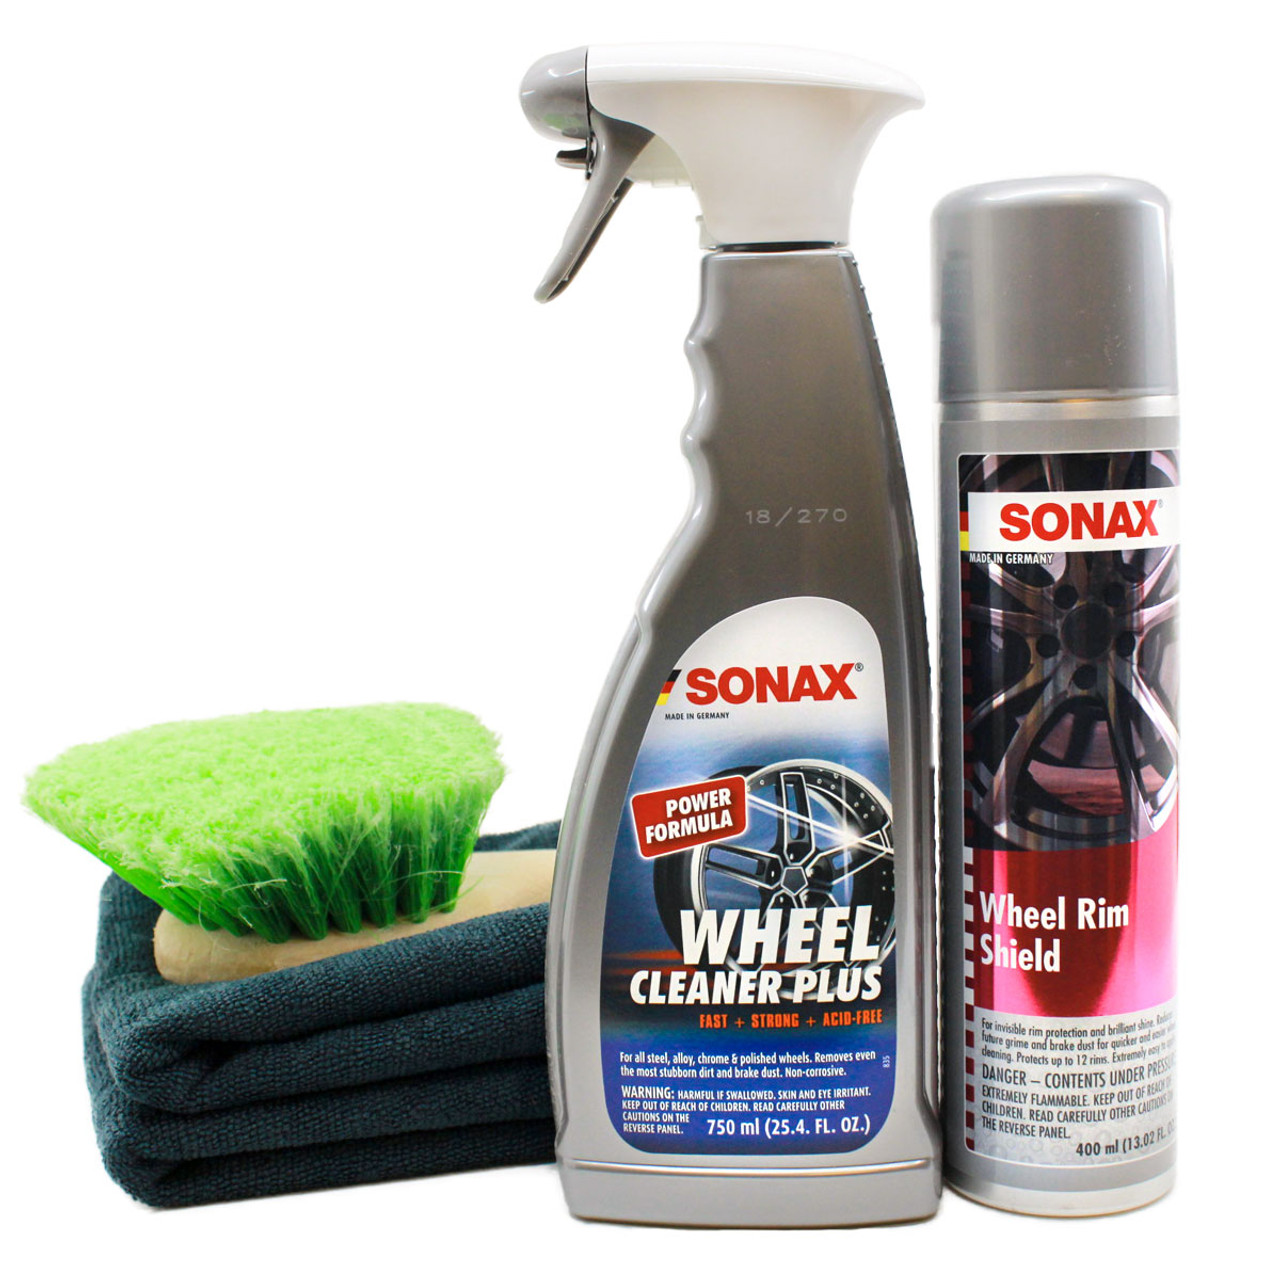 Car care, polishes and car wash products from SONAX - clean and polish like  the professionals